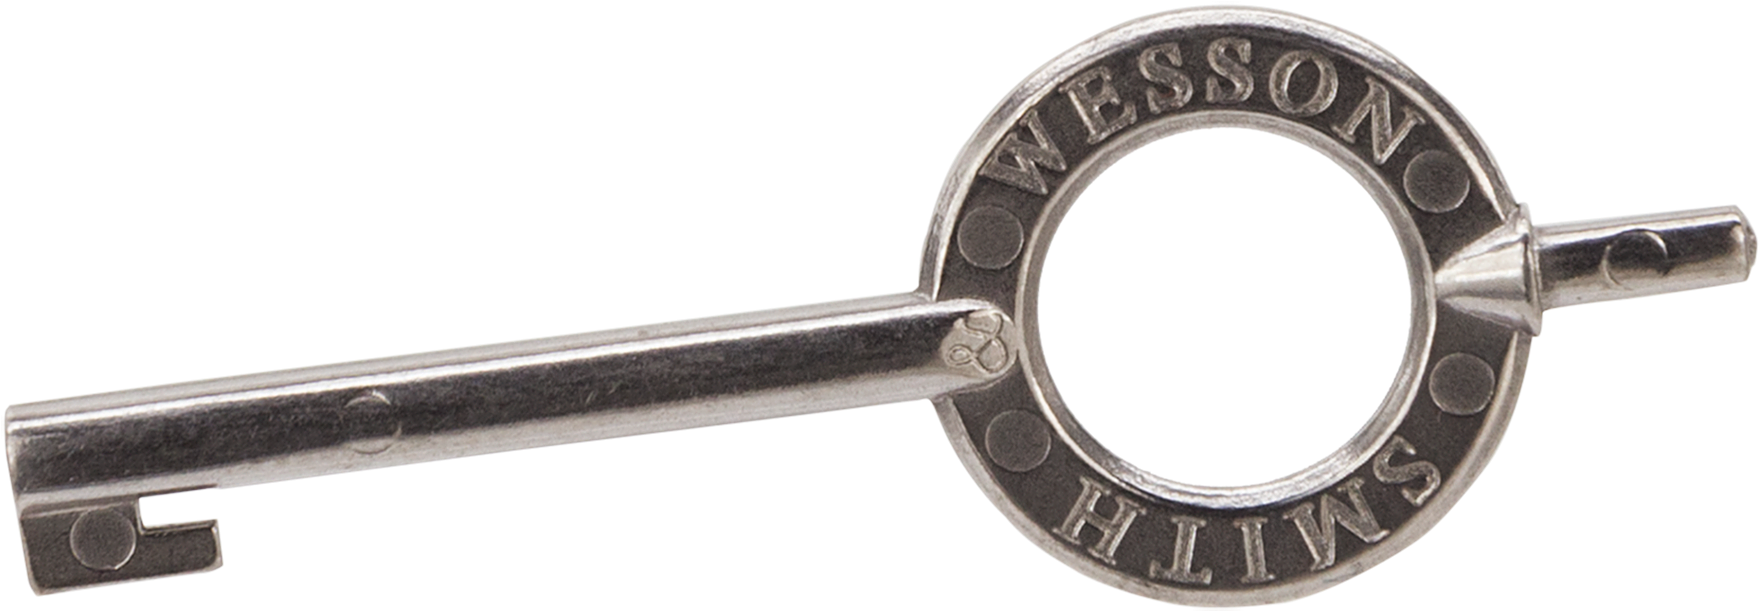 Handcuff Key Security Tool PNG image